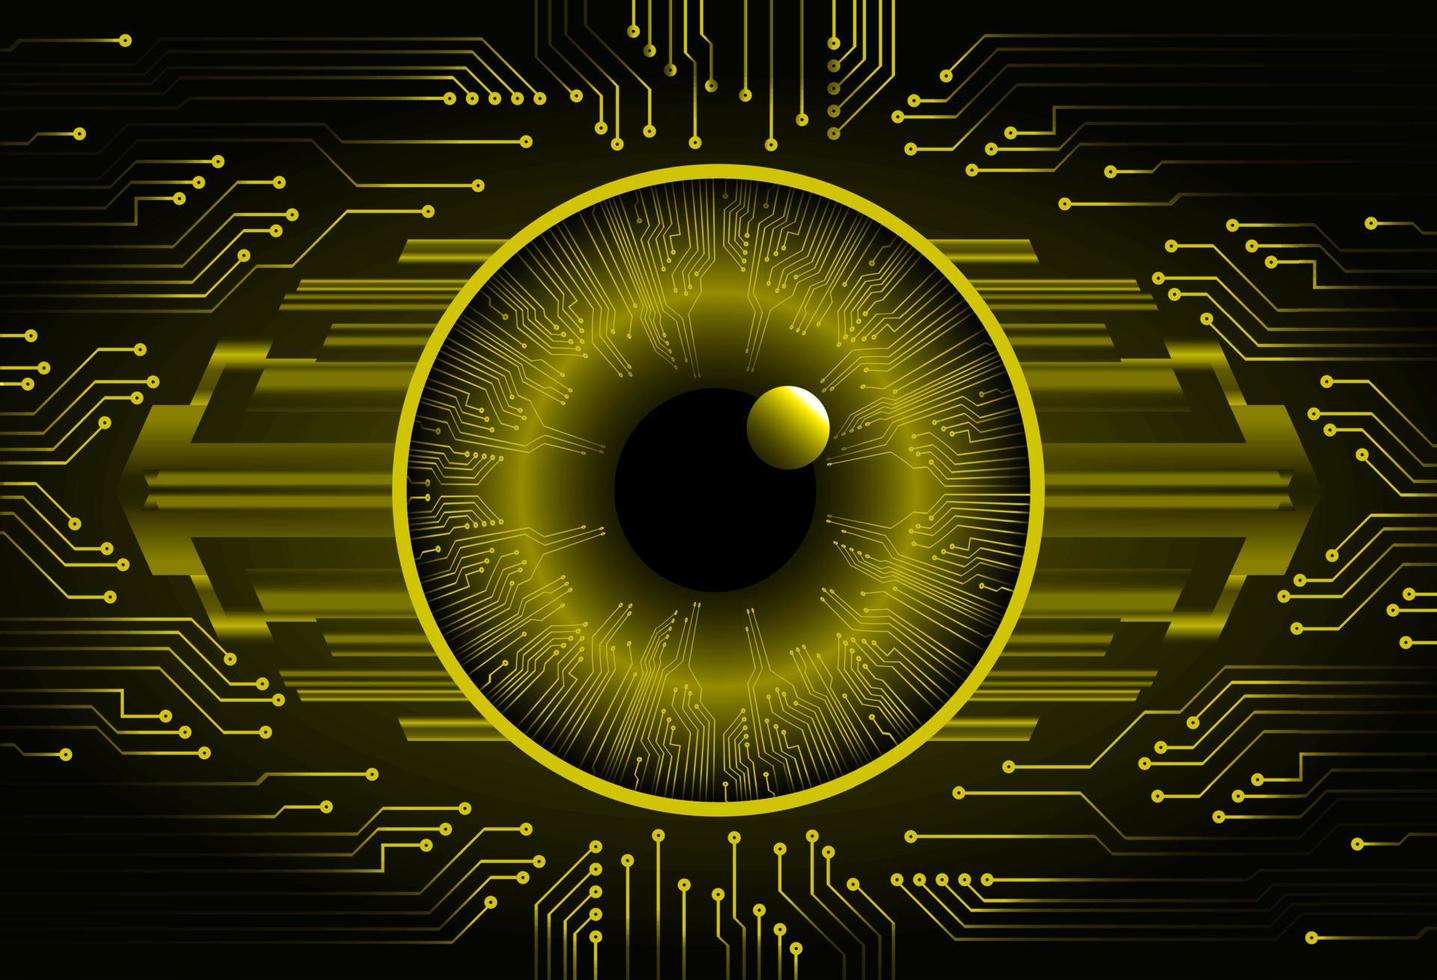 eye cyber circuit future technology concept background vector